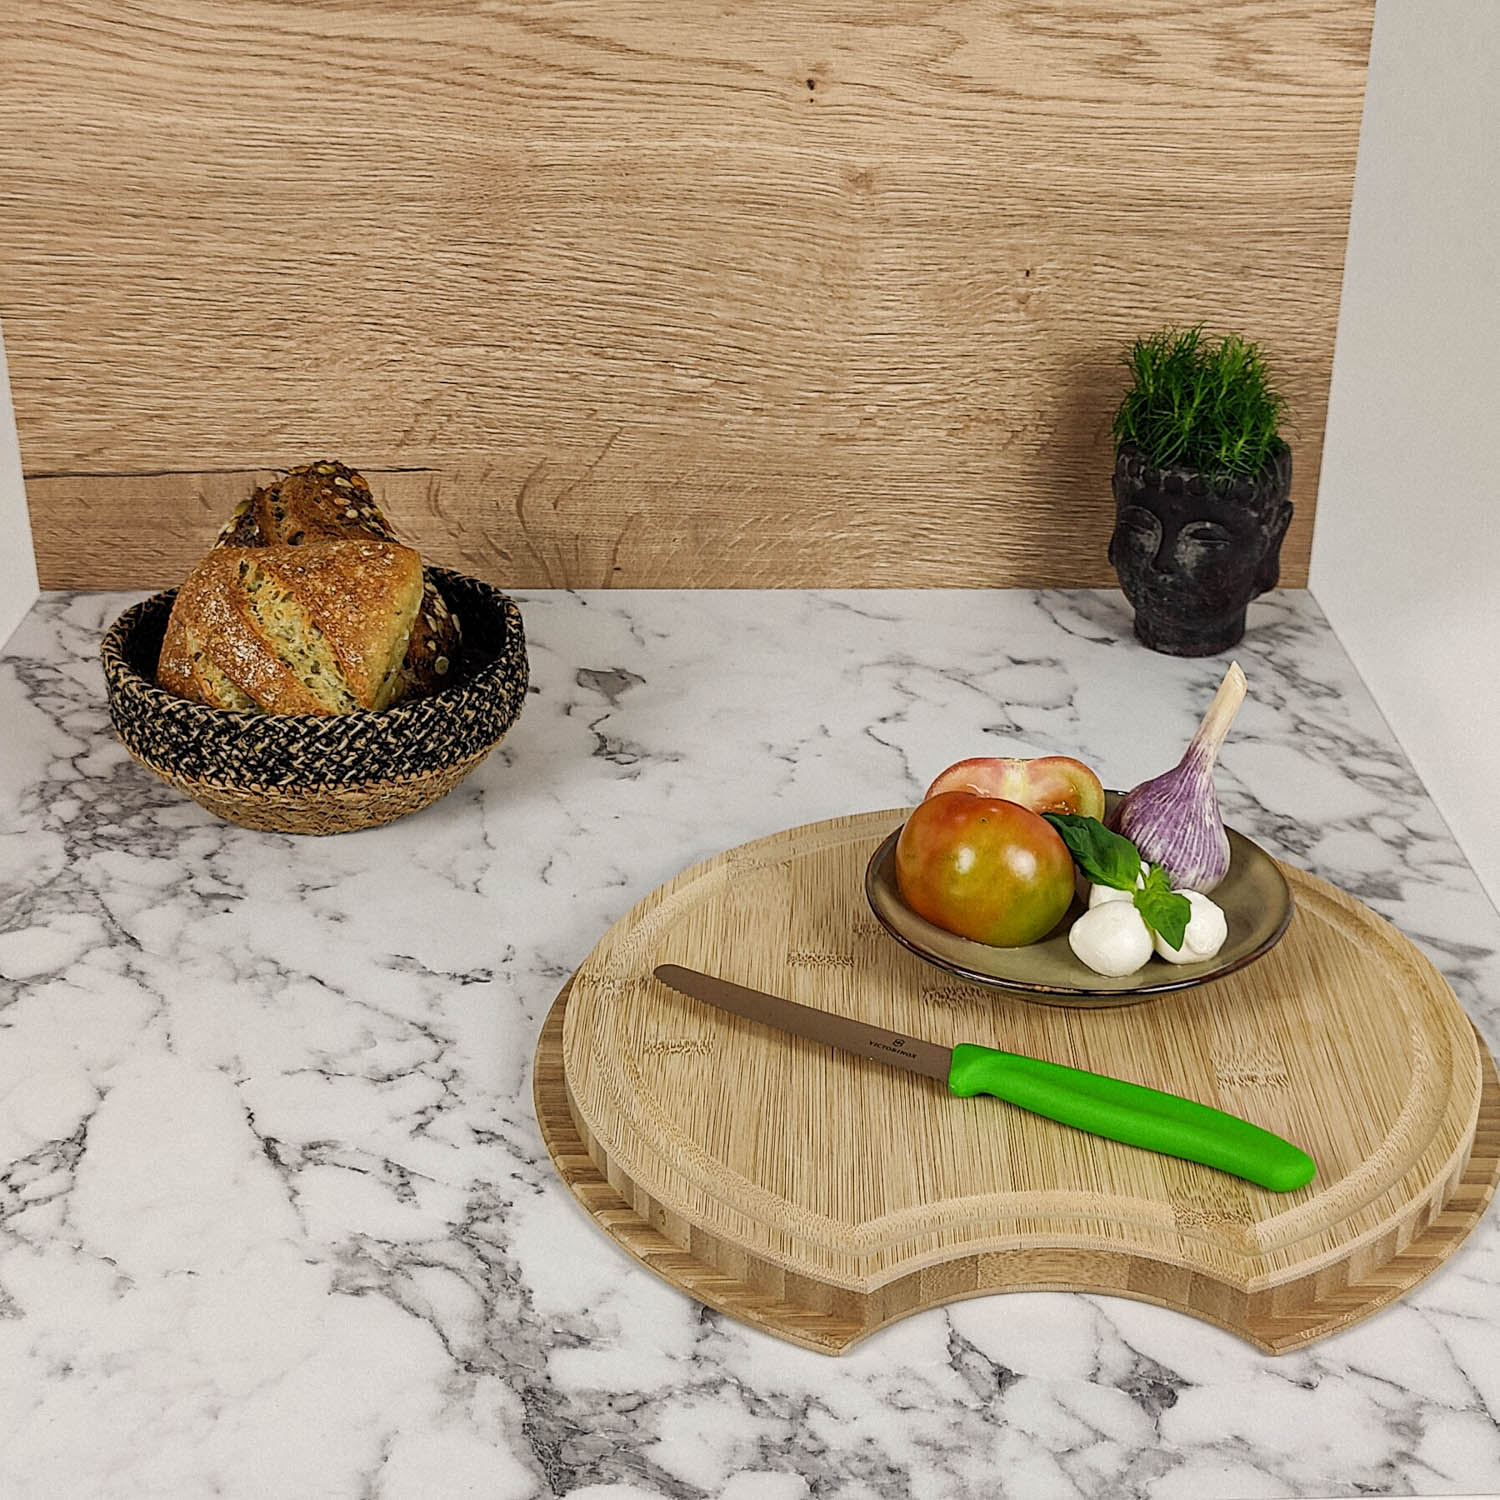 The cutting board with sink cover for Hobby models